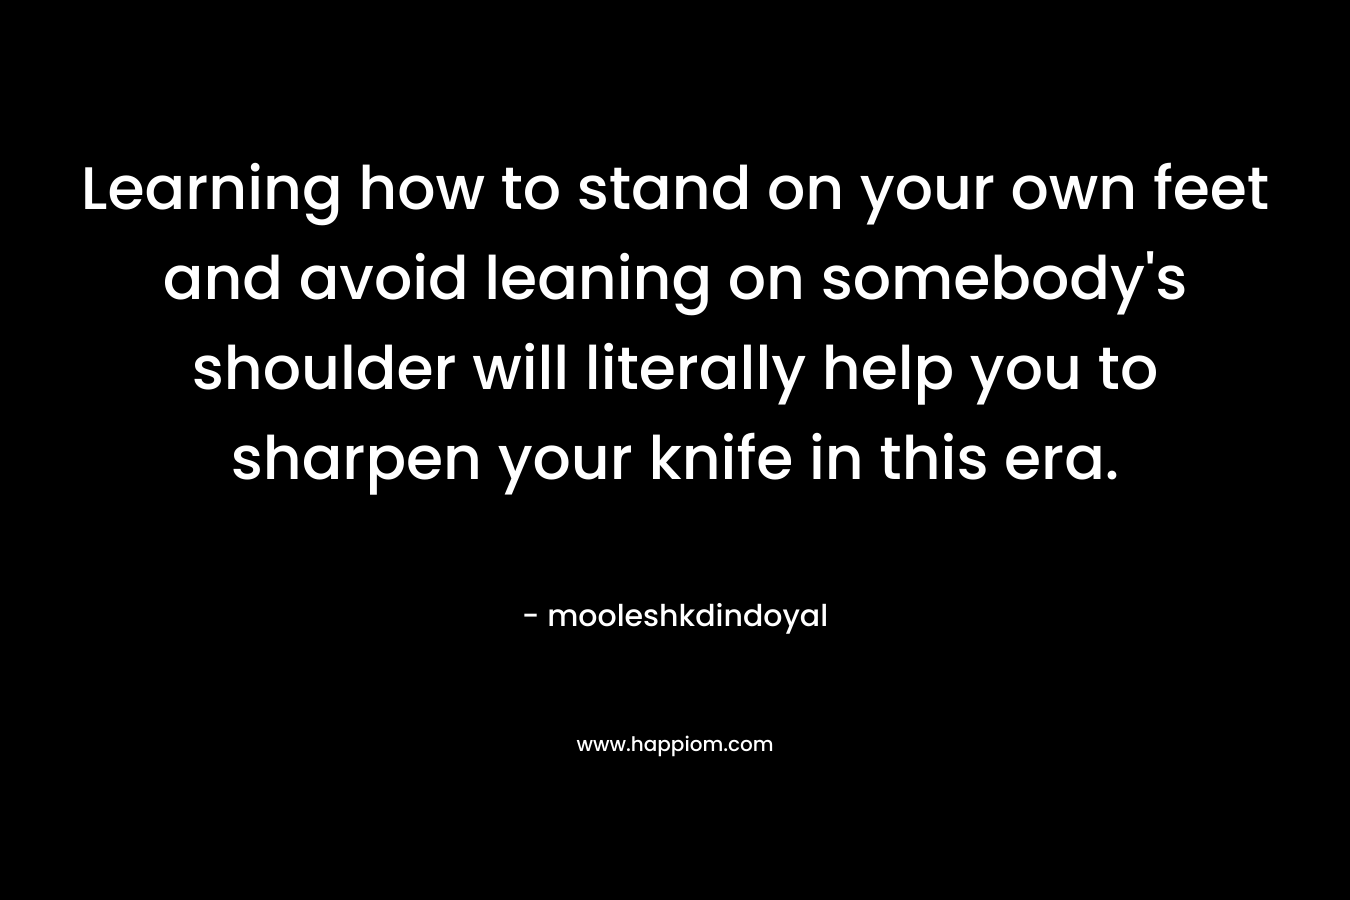 Learning how to stand on your own feet and avoid leaning on somebody's shoulder will literally help you to sharpen your knife in this era.